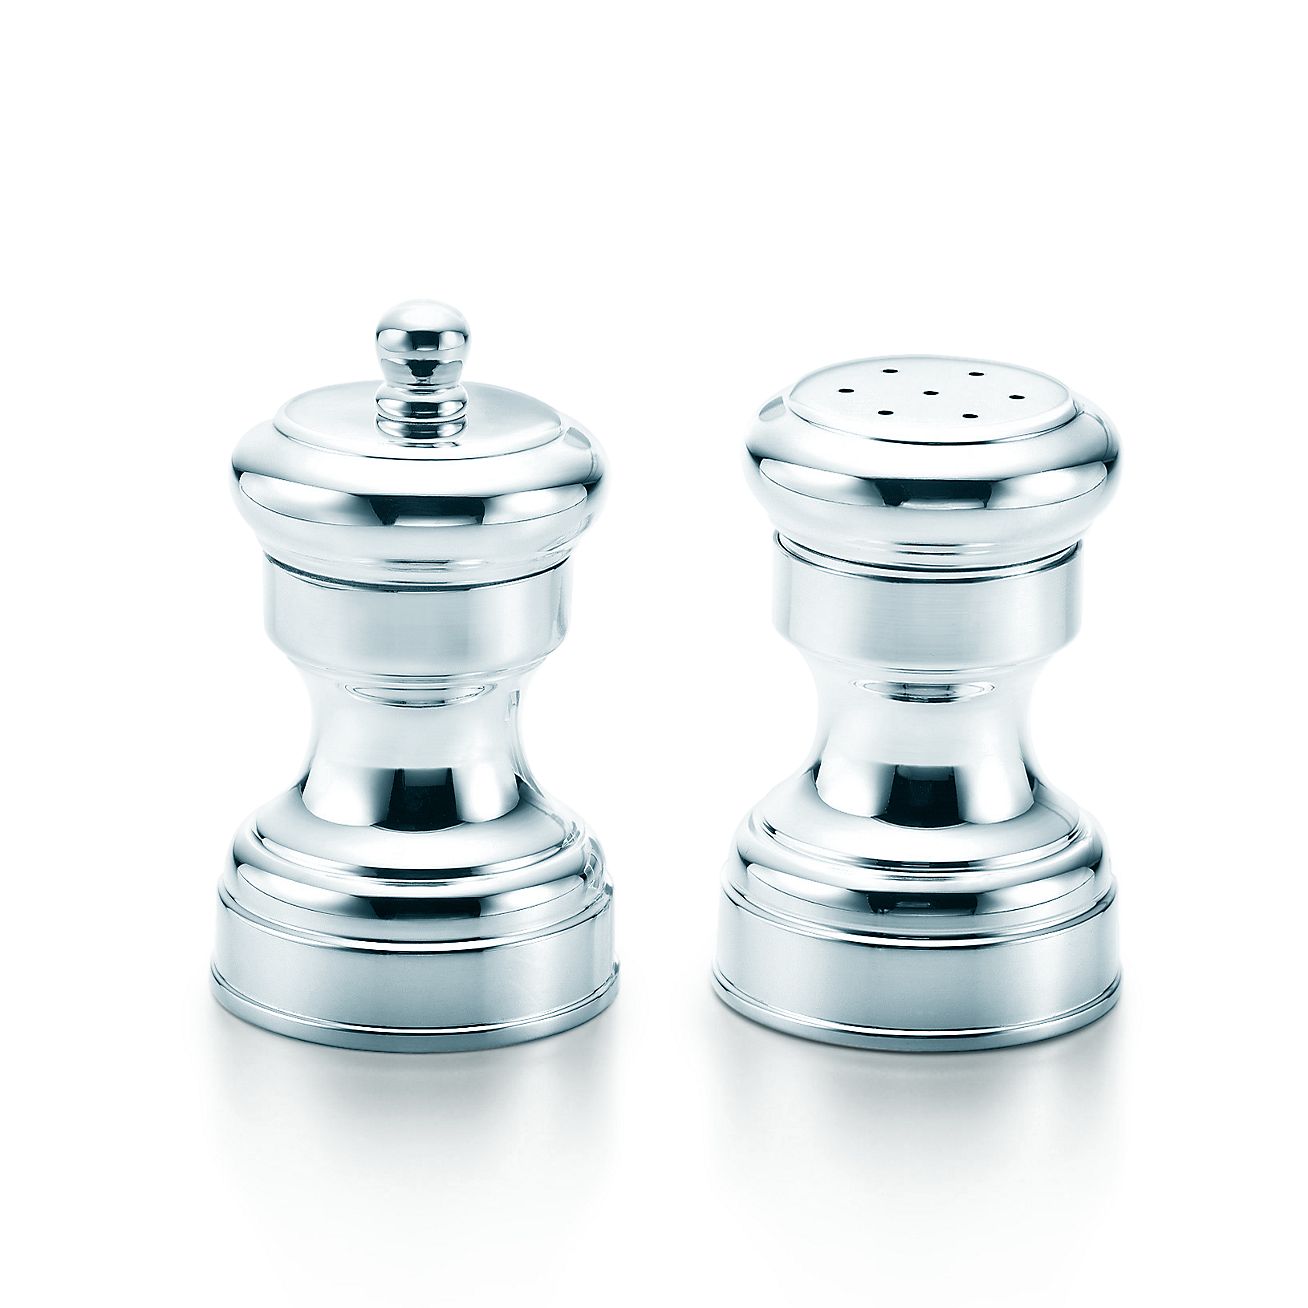 Capstan salt and pepper shakers in 